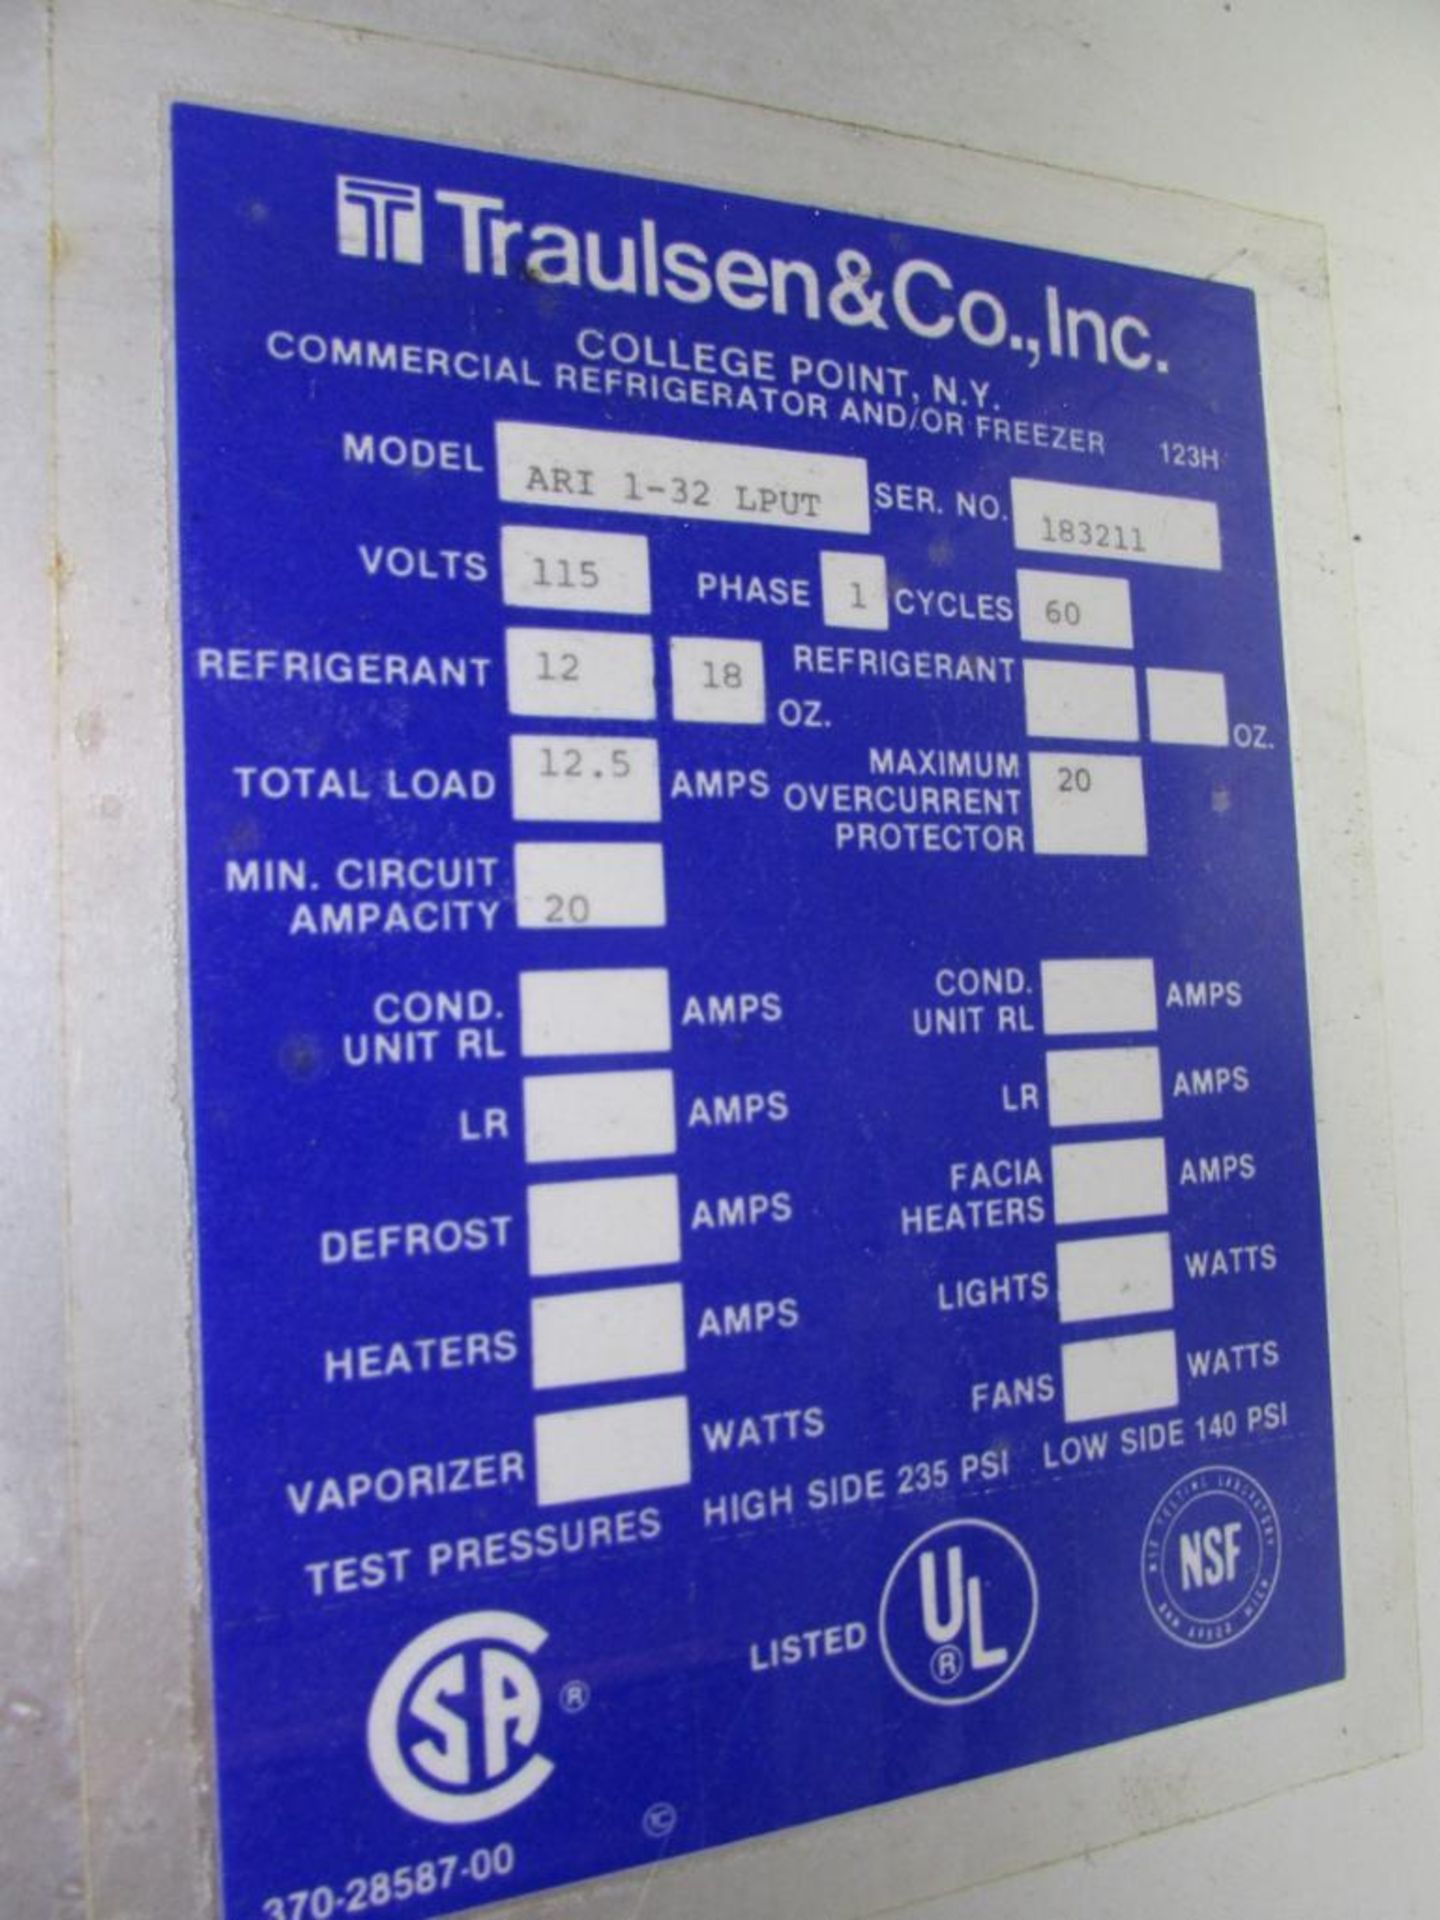 Traulsen & Co. ARI 1-32 LPUT Commercial Refrigerator. Approx. 30"x28"68" Chamber, 115V 60Hz 1PH. S/N - Image 5 of 5